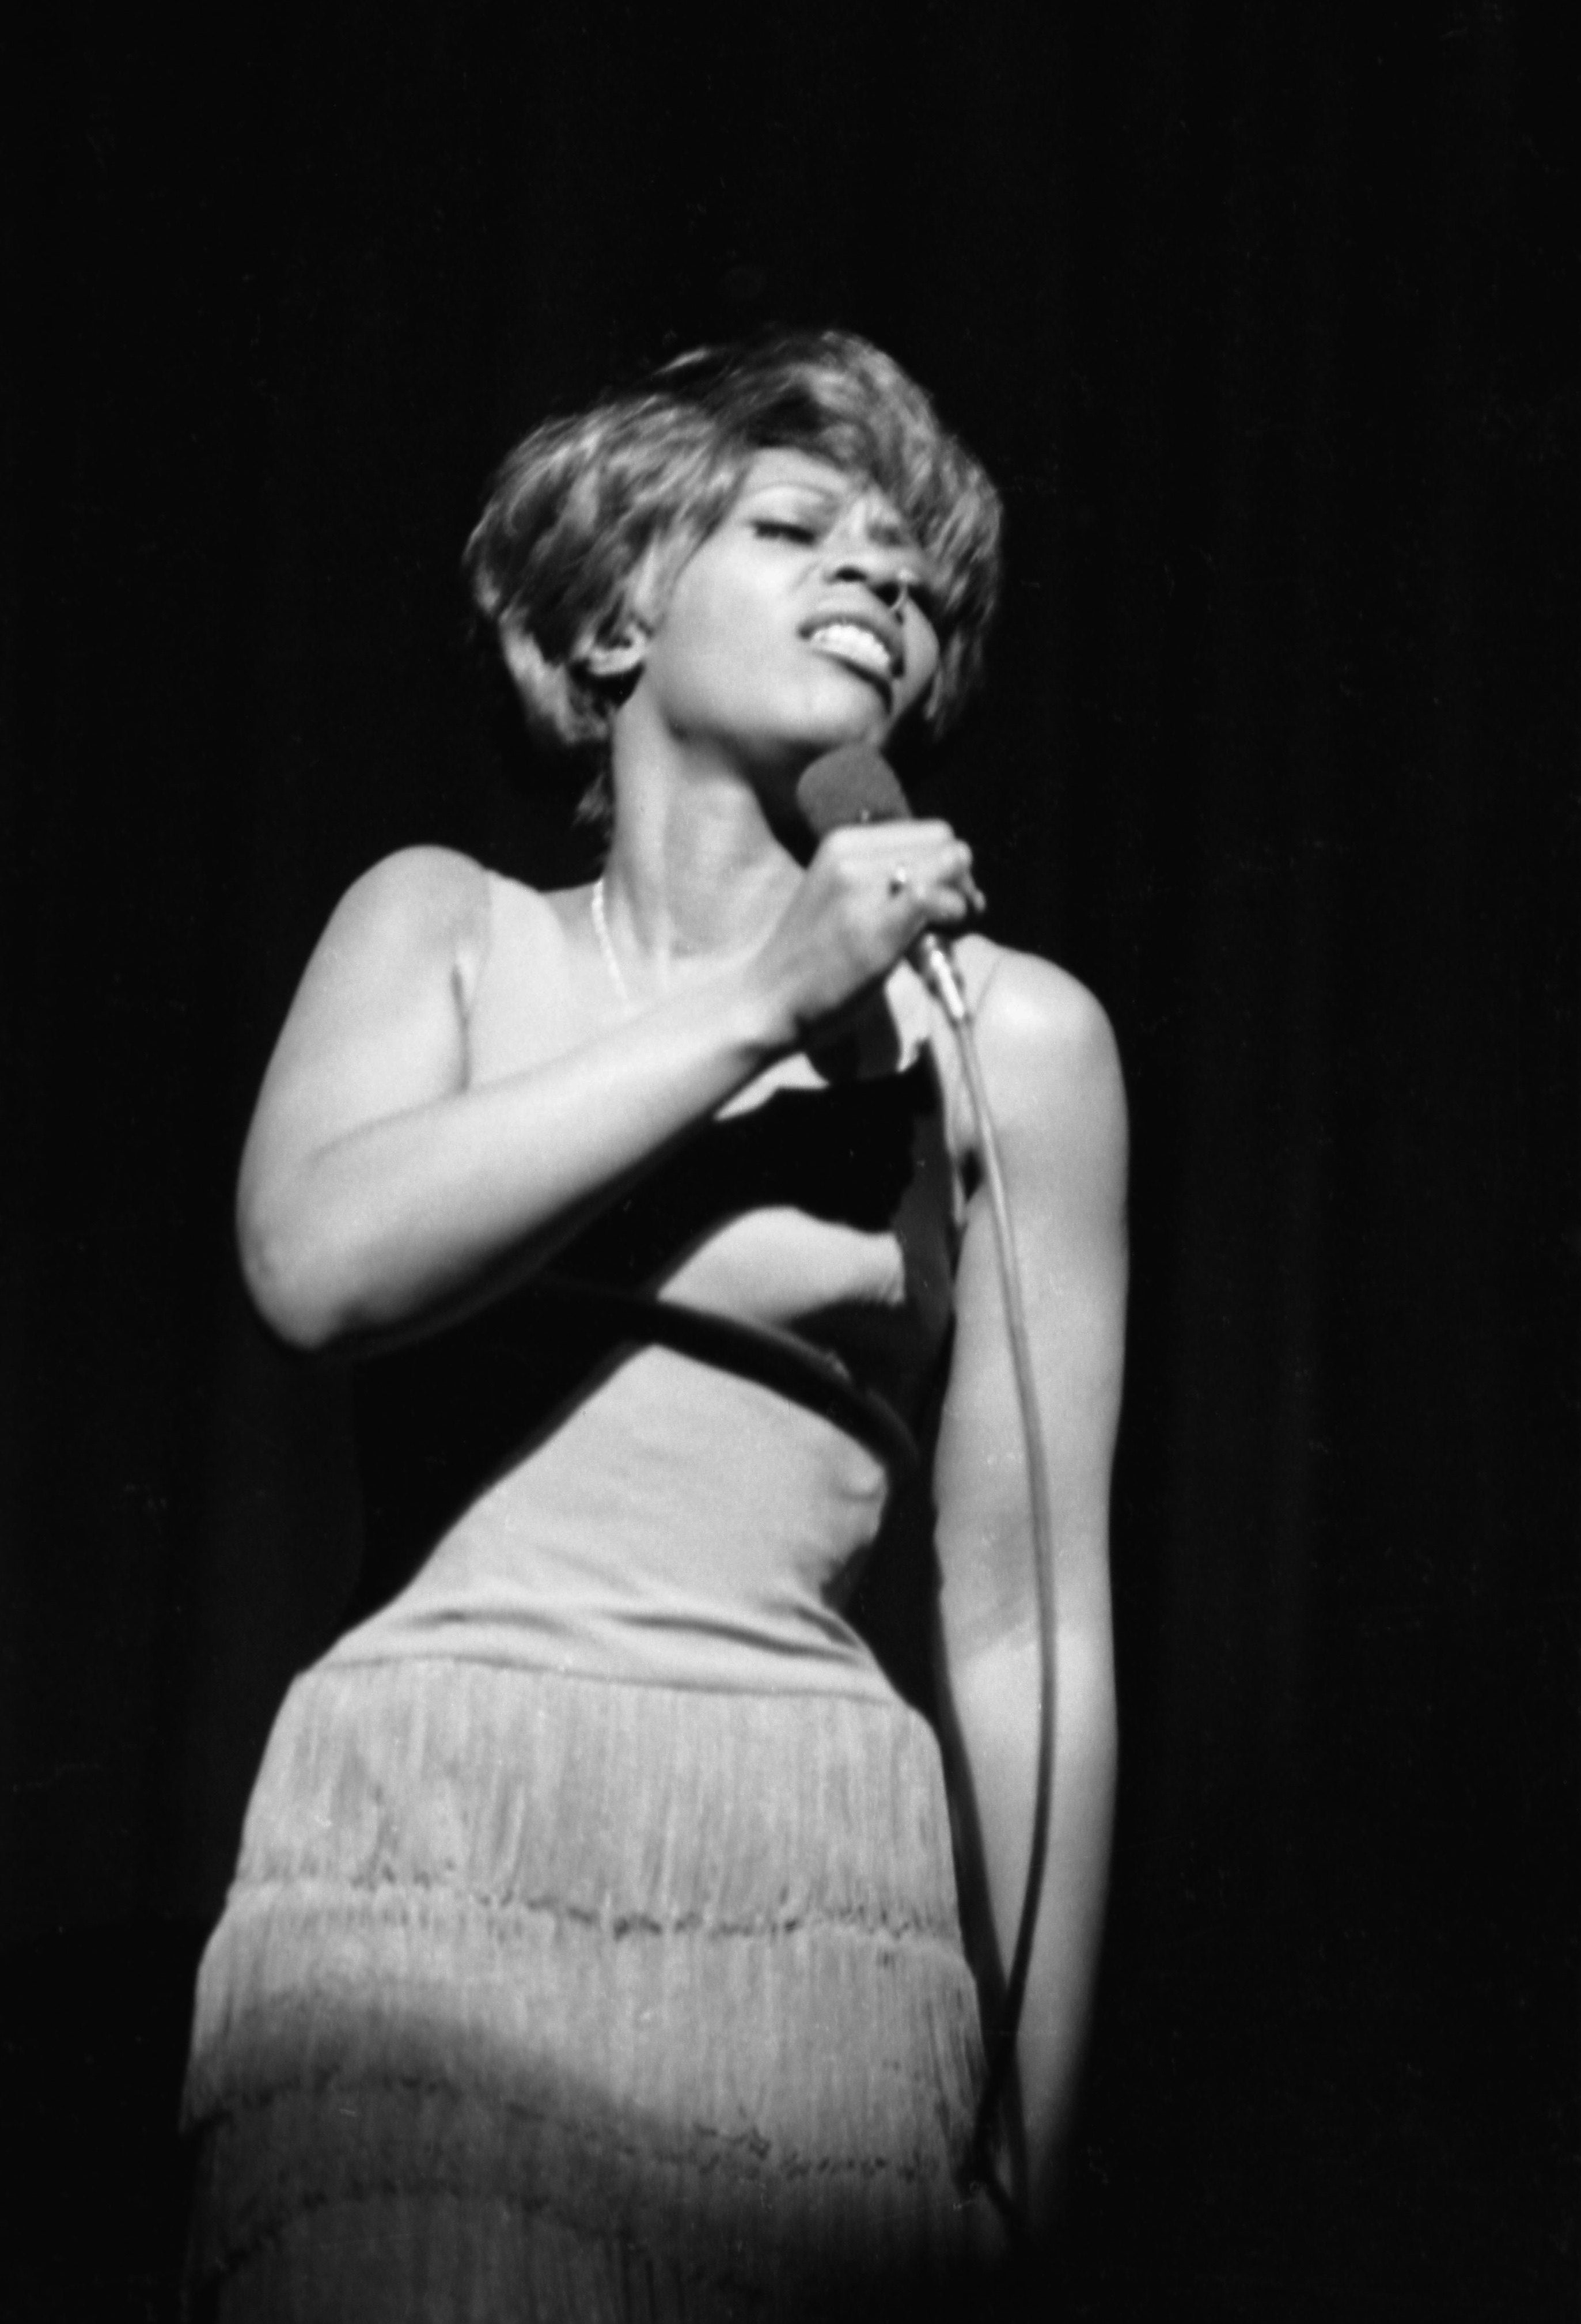 DuShon performing at the Apollo Theatre in New York, 1966